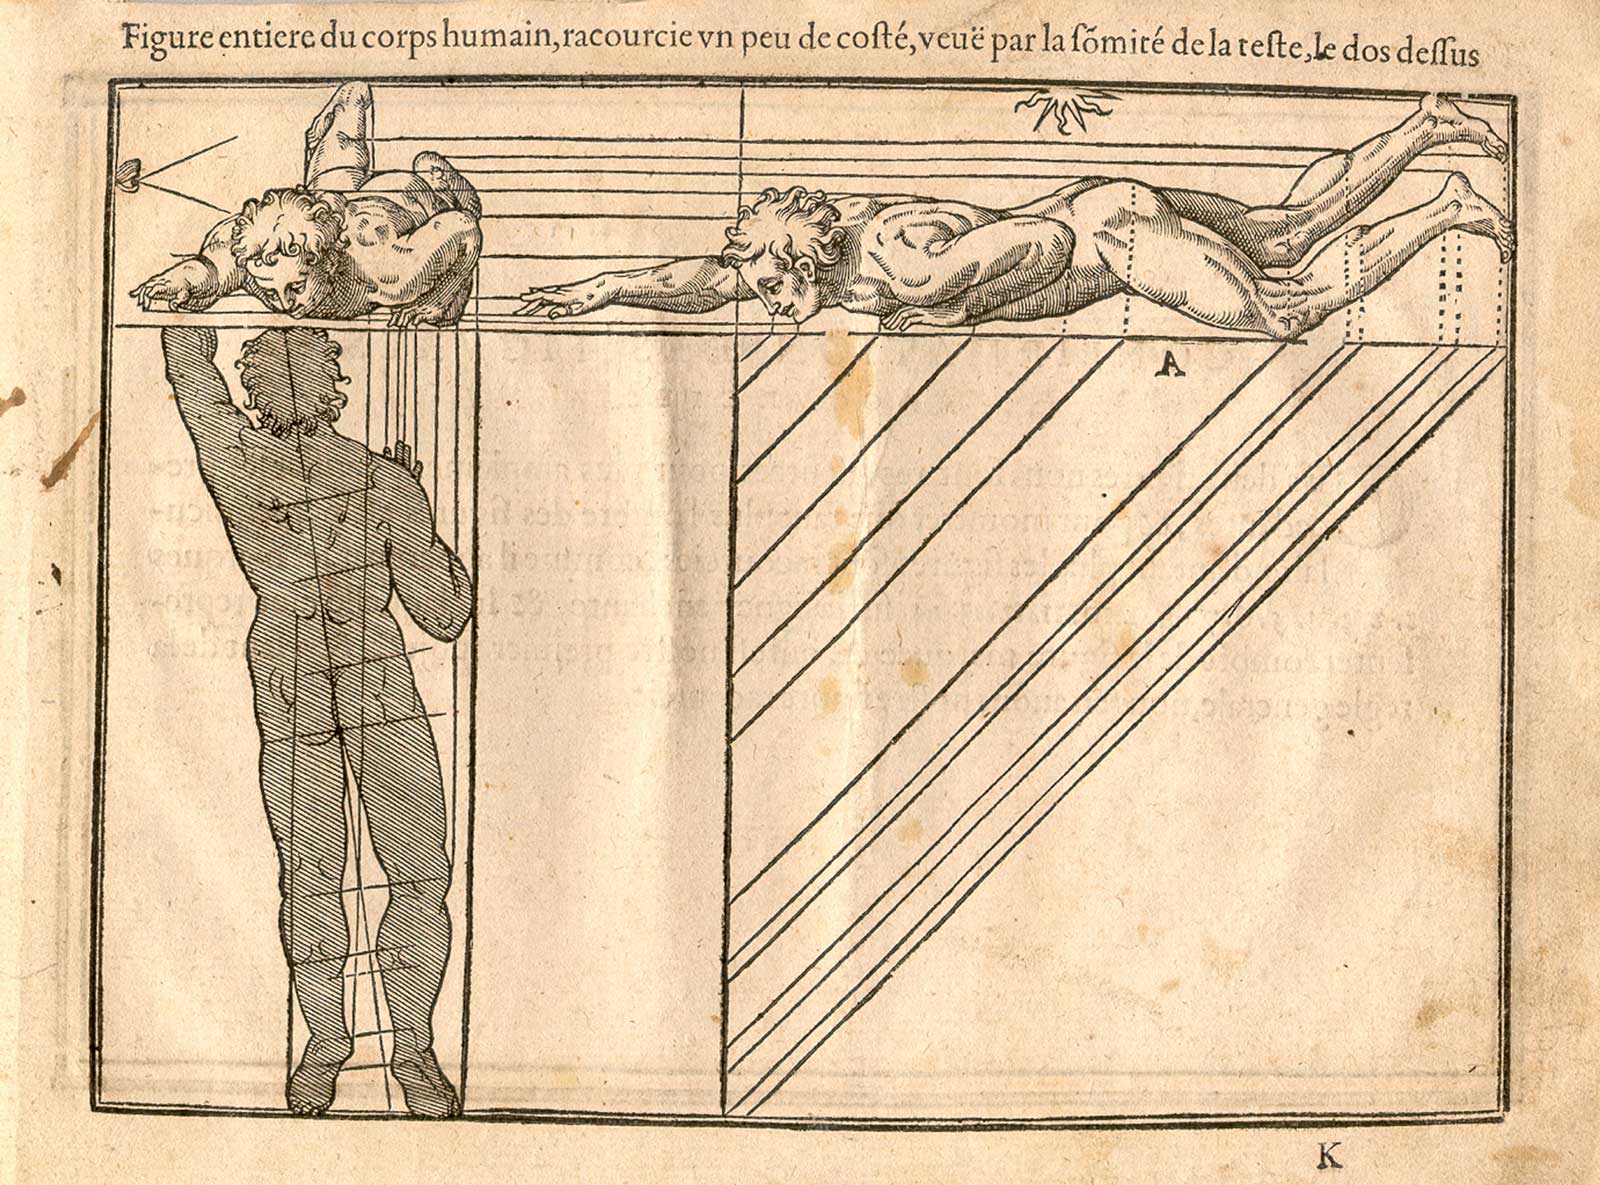 Woodcut illustration of two nude male anatomical figures lying down on their stomachs on a flat surface, viewed from the side and from the head, both images in identical poses, both images showing the proportions of the figure measured out, from Jehan Cousin’s Livre de pourtraiture, NLM Call no.: WZ 250 C8673L 1608.